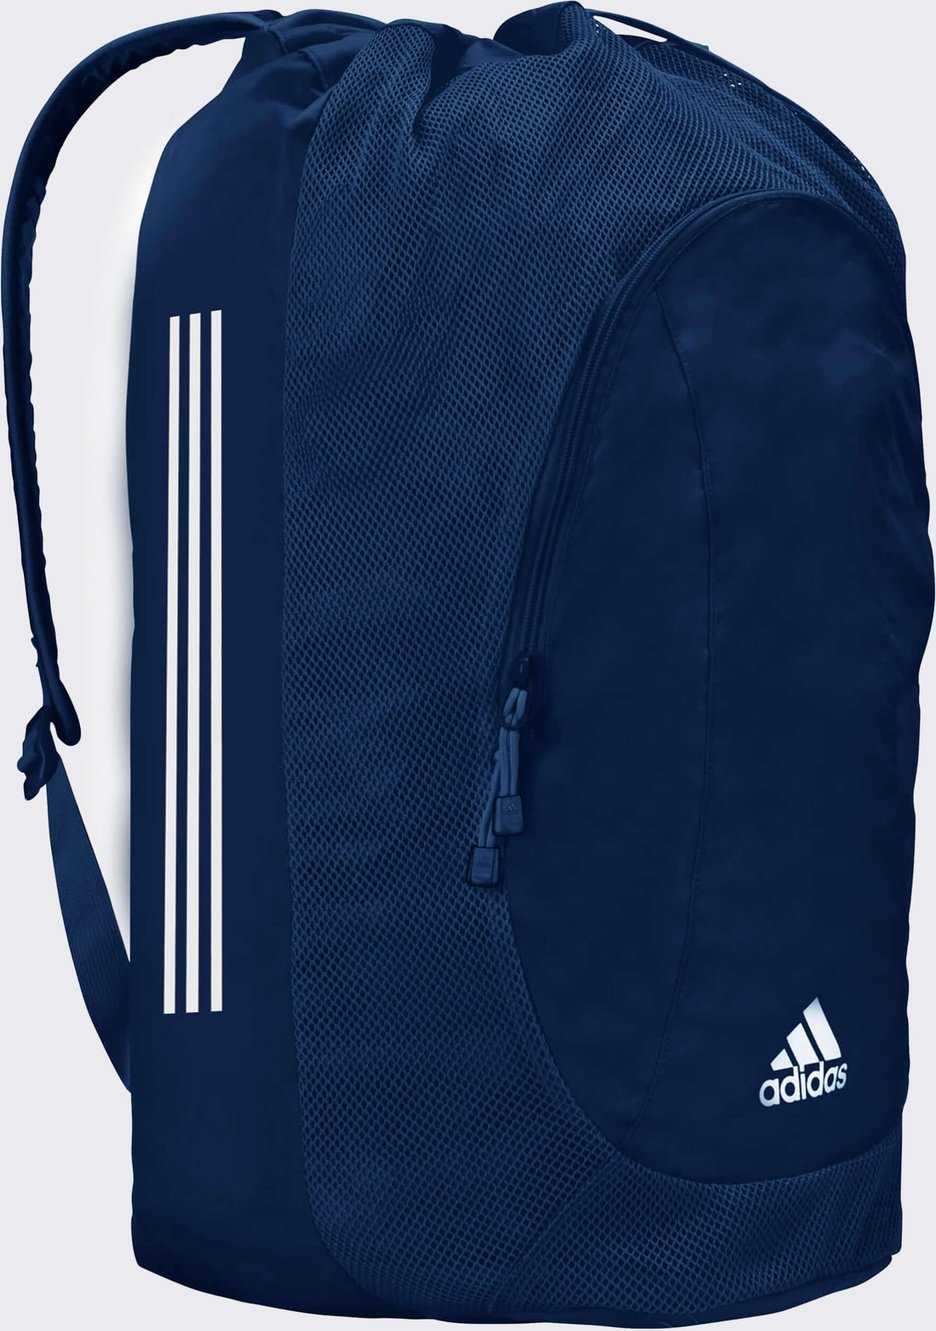 Adidas aA5147203 Wrestling Gear Bag - Navy White - HIT a Double - 1